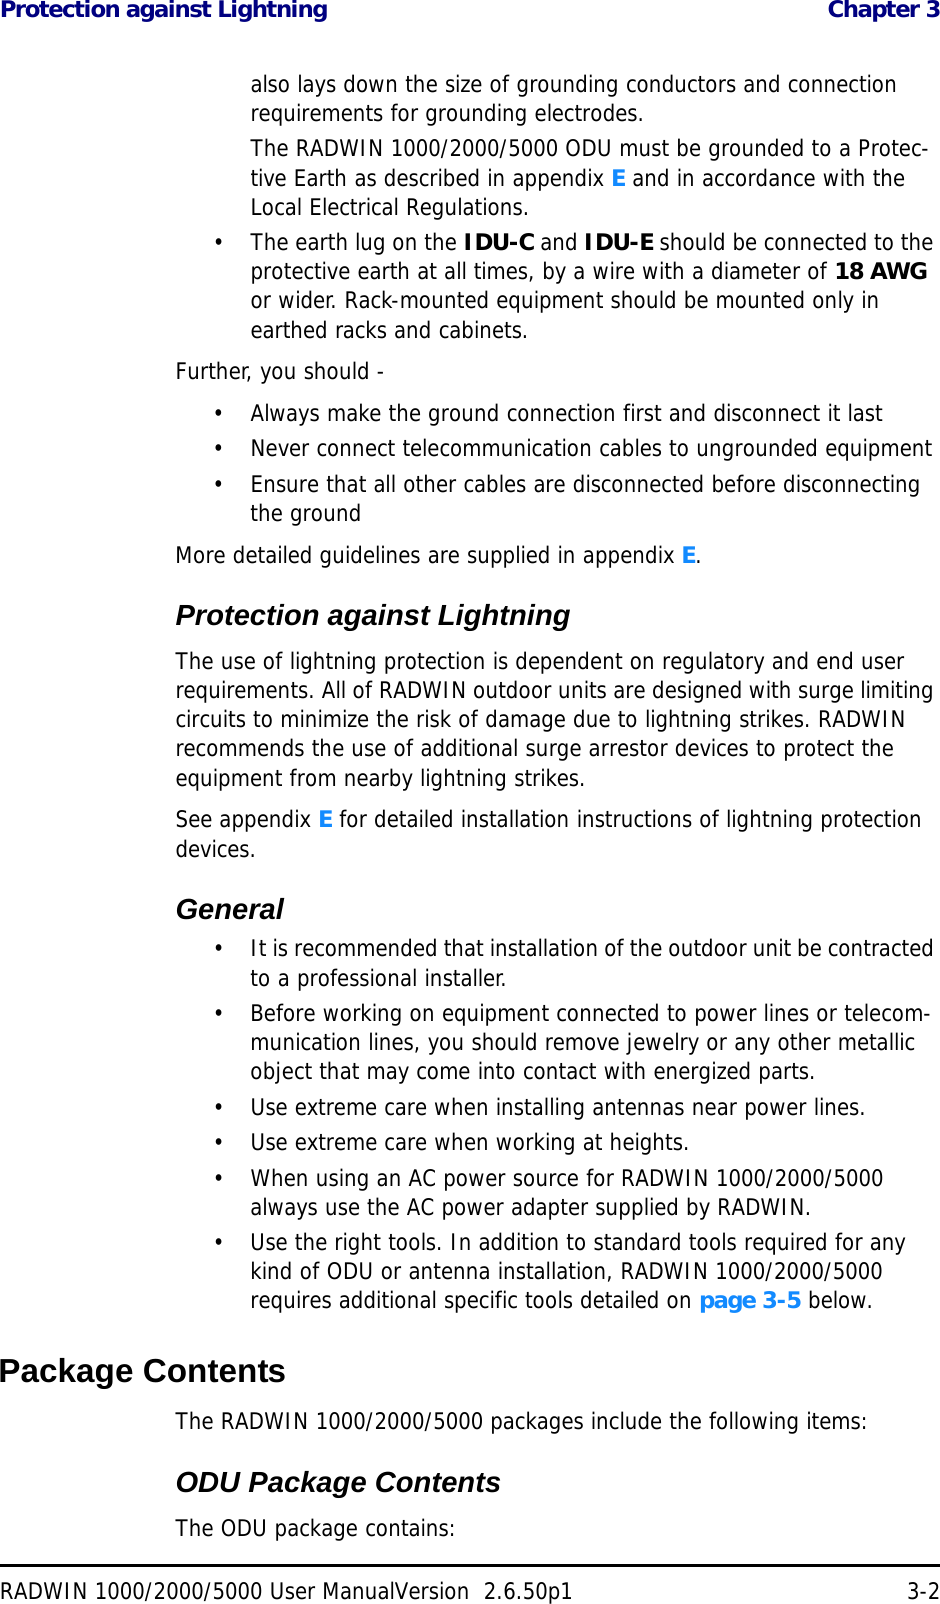 Protection against Lightning  Chapter 3RADWIN 1000/2000/5000 User ManualVersion  2.6.50p1 3-2also lays down the size of grounding conductors and connection requirements for grounding electrodes.The RADWIN 1000/2000/5000 ODU must be grounded to a Protec-tive Earth as described in appendix E and in accordance with the Local Electrical Regulations.• The earth lug on the IDU-C and IDU-E should be connected to the protective earth at all times, by a wire with a diameter of 18 AWG or wider. Rack-mounted equipment should be mounted only in earthed racks and cabinets.Further, you should -• Always make the ground connection first and disconnect it last• Never connect telecommunication cables to ungrounded equipment• Ensure that all other cables are disconnected before disconnecting the groundMore detailed guidelines are supplied in appendix E.Protection against LightningThe use of lightning protection is dependent on regulatory and end user requirements. All of RADWIN outdoor units are designed with surge limiting circuits to minimize the risk of damage due to lightning strikes. RADWIN recommends the use of additional surge arrestor devices to protect the equipment from nearby lightning strikes.See appendix E for detailed installation instructions of lightning protection devices.General• It is recommended that installation of the outdoor unit be contracted to a professional installer.• Before working on equipment connected to power lines or telecom-munication lines, you should remove jewelry or any other metallic object that may come into contact with energized parts.• Use extreme care when installing antennas near power lines.• Use extreme care when working at heights.• When using an AC power source for RADWIN 1000/2000/5000 always use the AC power adapter supplied by RADWIN.• Use the right tools. In addition to standard tools required for any kind of ODU or antenna installation, RADWIN 1000/2000/5000 requires additional specific tools detailed on page 3-5 below.Package ContentsThe RADWIN 1000/2000/5000 packages include the following items:ODU Package ContentsThe ODU package contains: